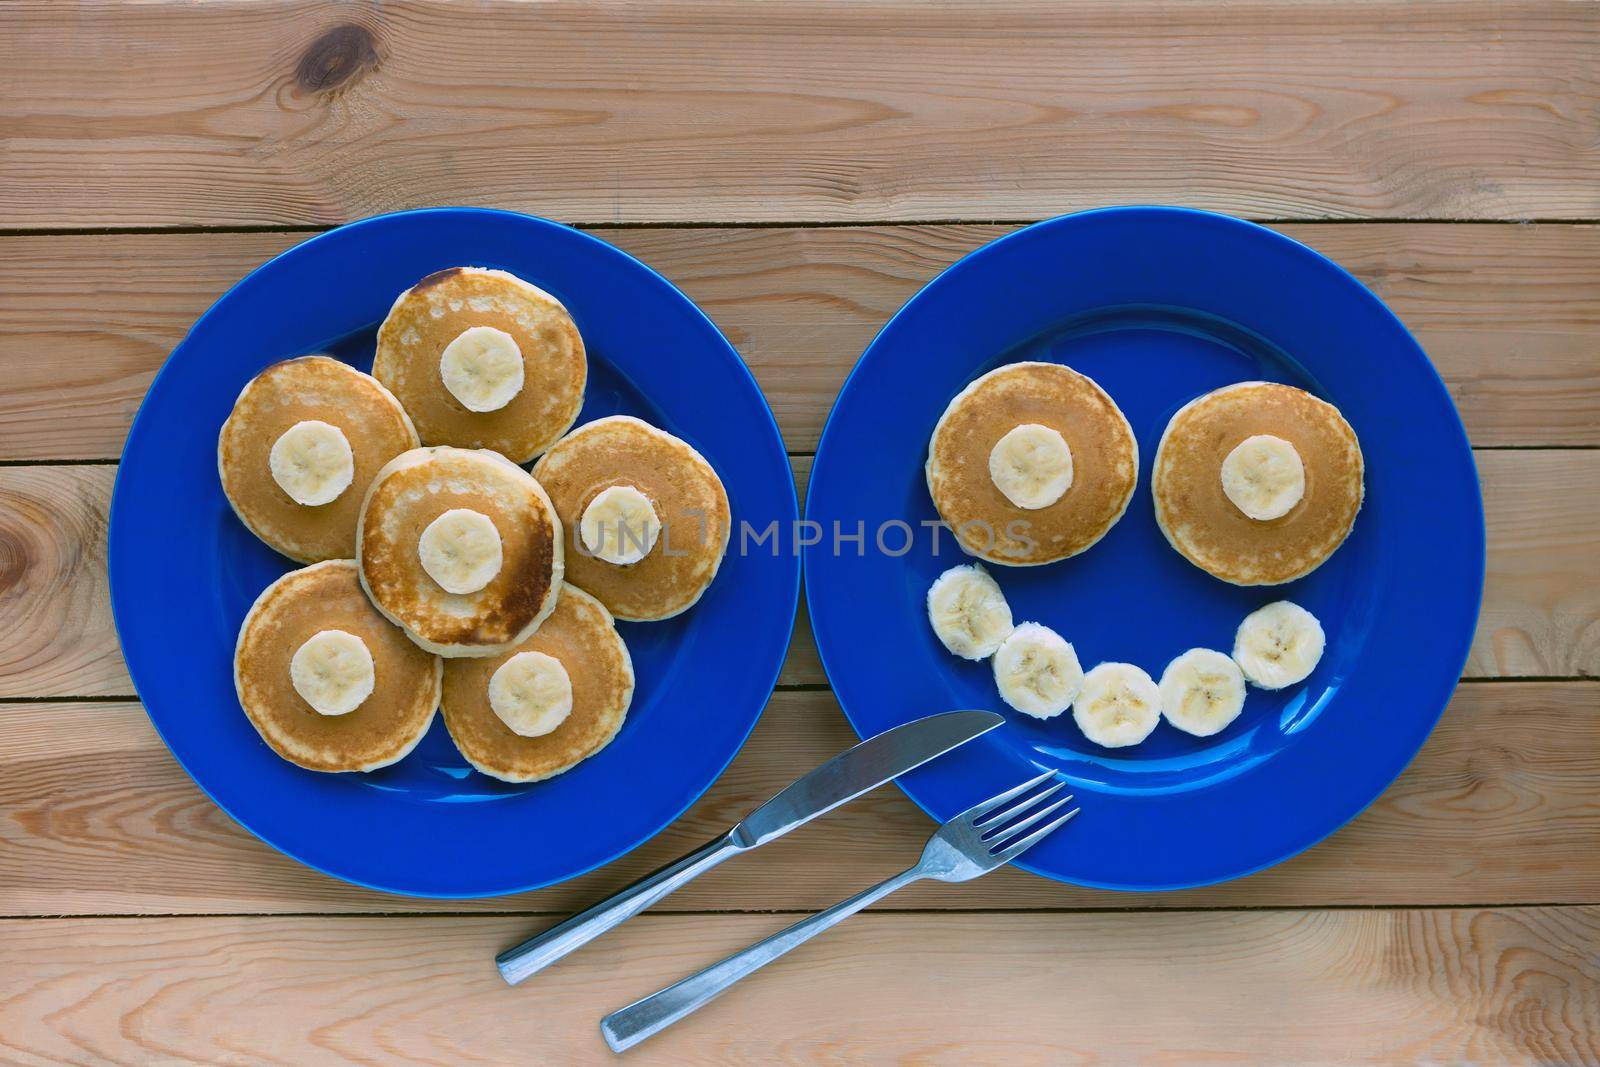 Pancakes with smile and flower image on blue plates and wooden background. banana fruit smiling breakfast - fun food for kids